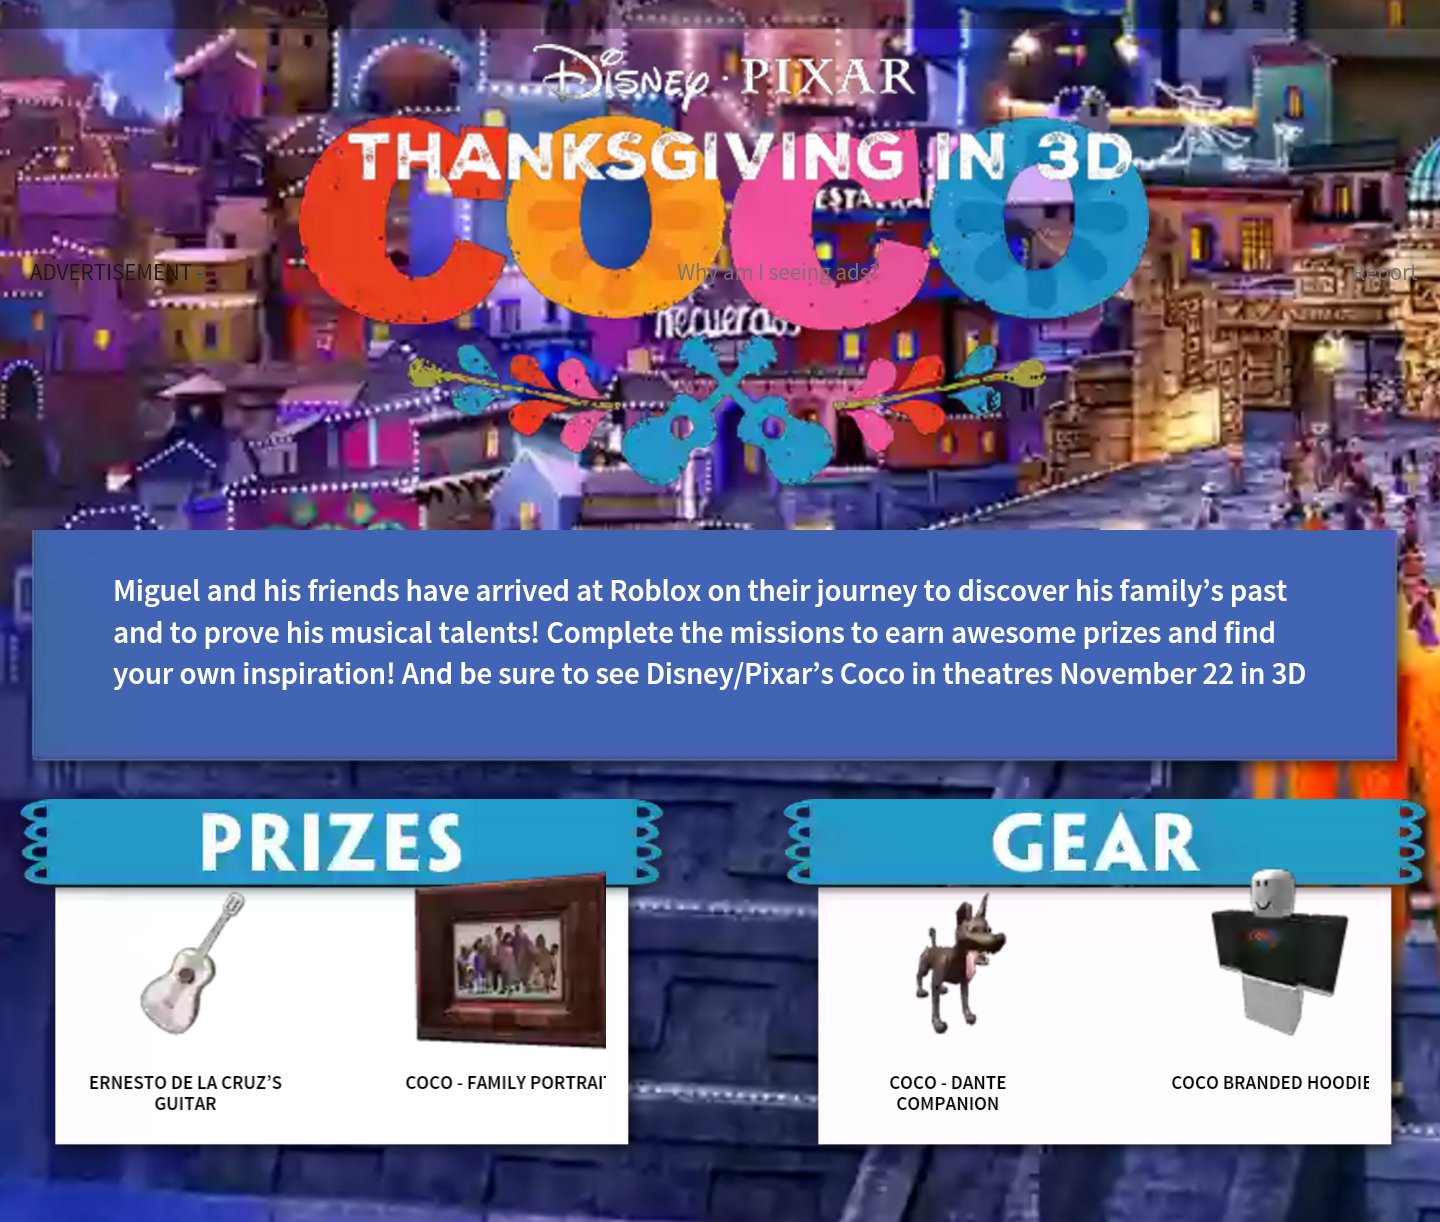 Roblox News On Twitter The Coco Event Was Just Released You Have 23 Days To Play All Of The Games And Earn Prizes - dante roblox